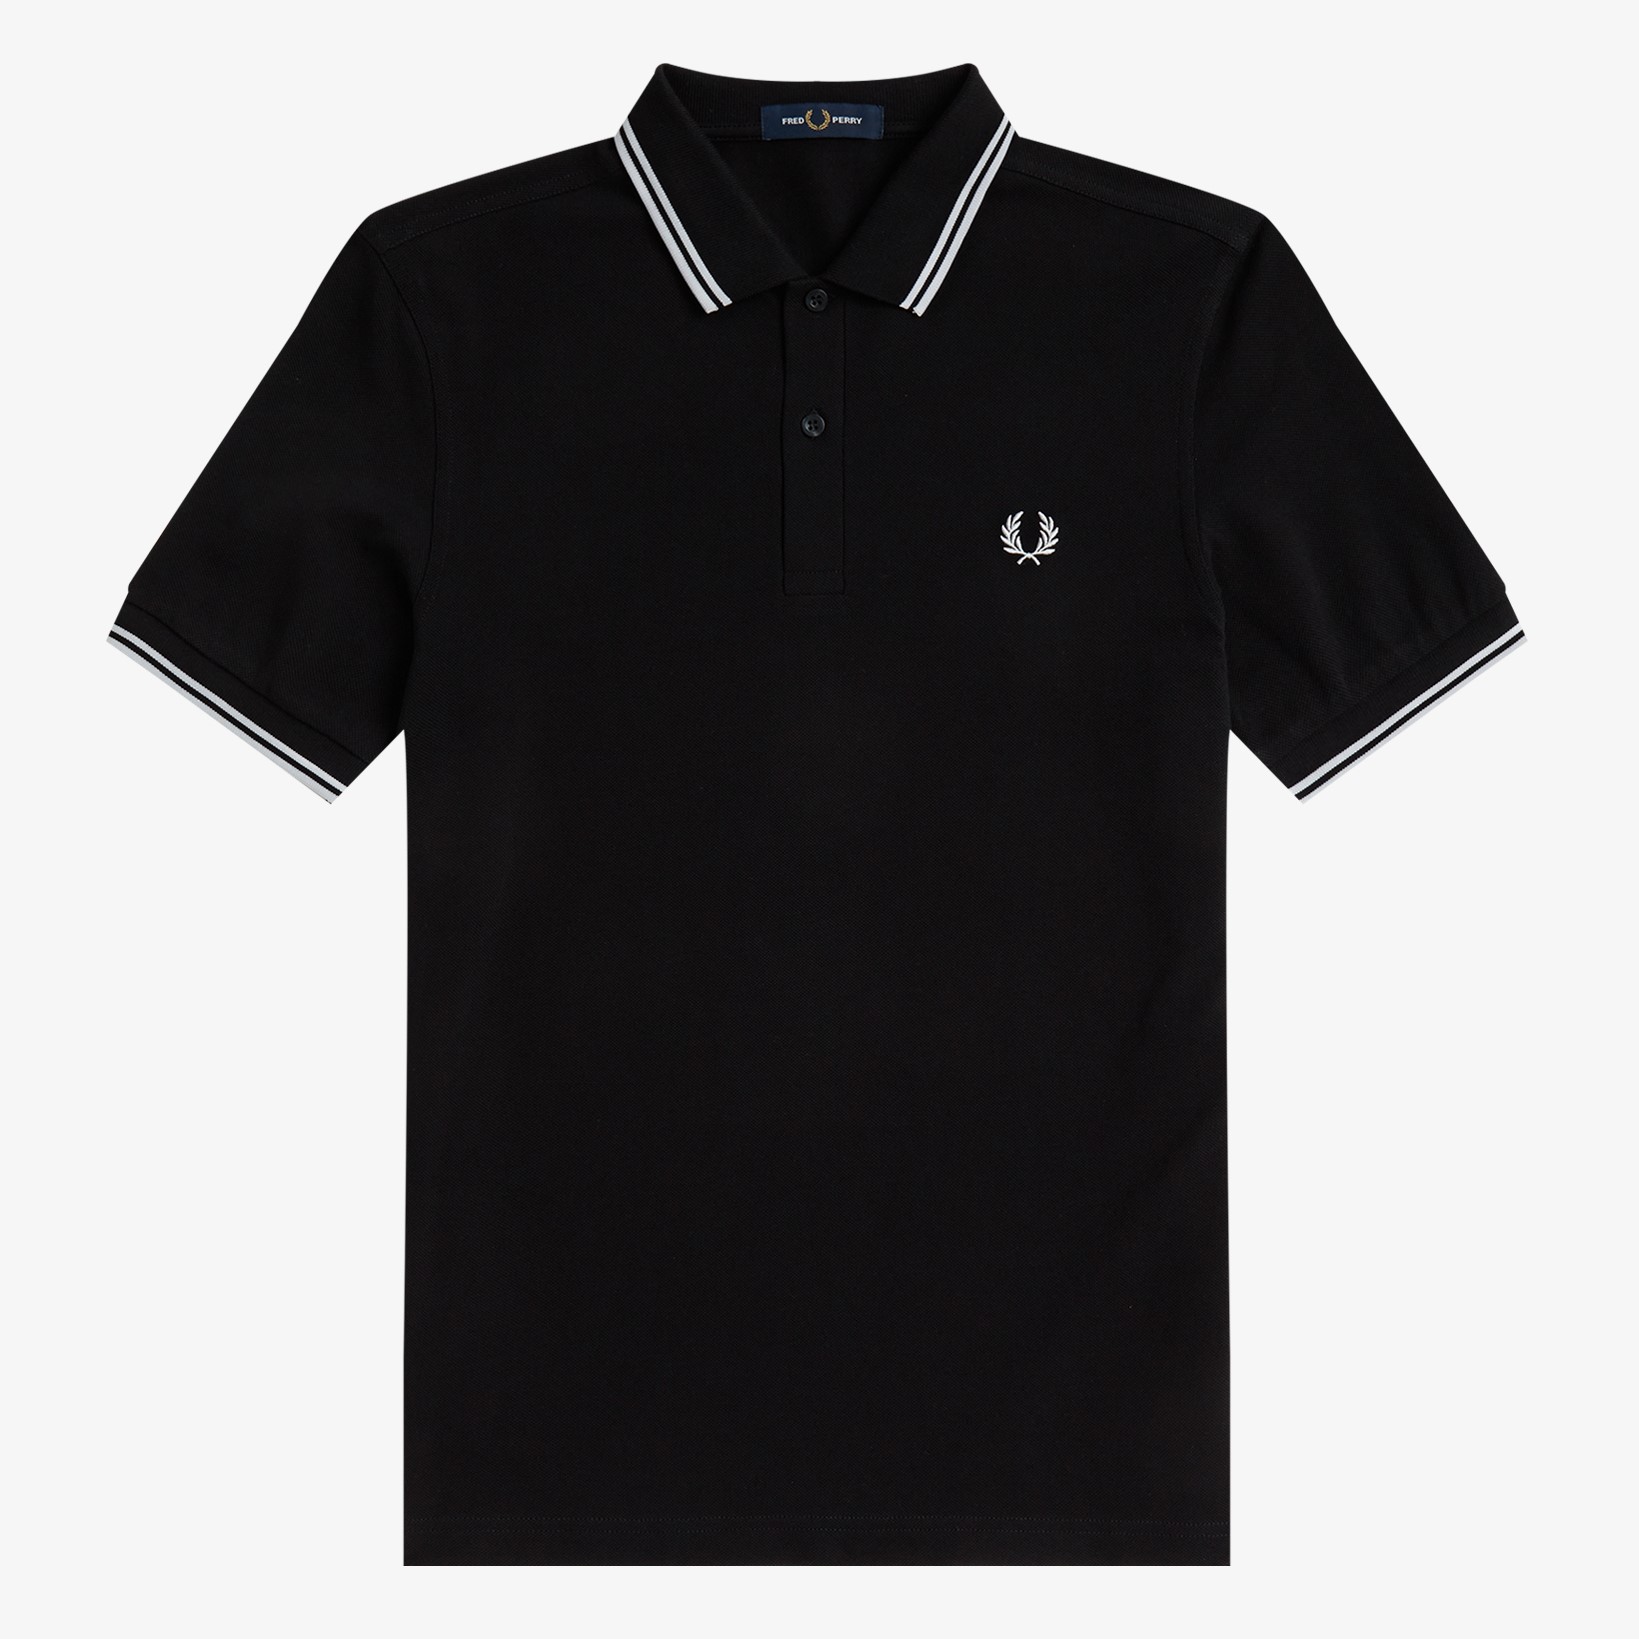 Fred Perry - TWIN TIPPED POLO SHIRT - Black/White/White